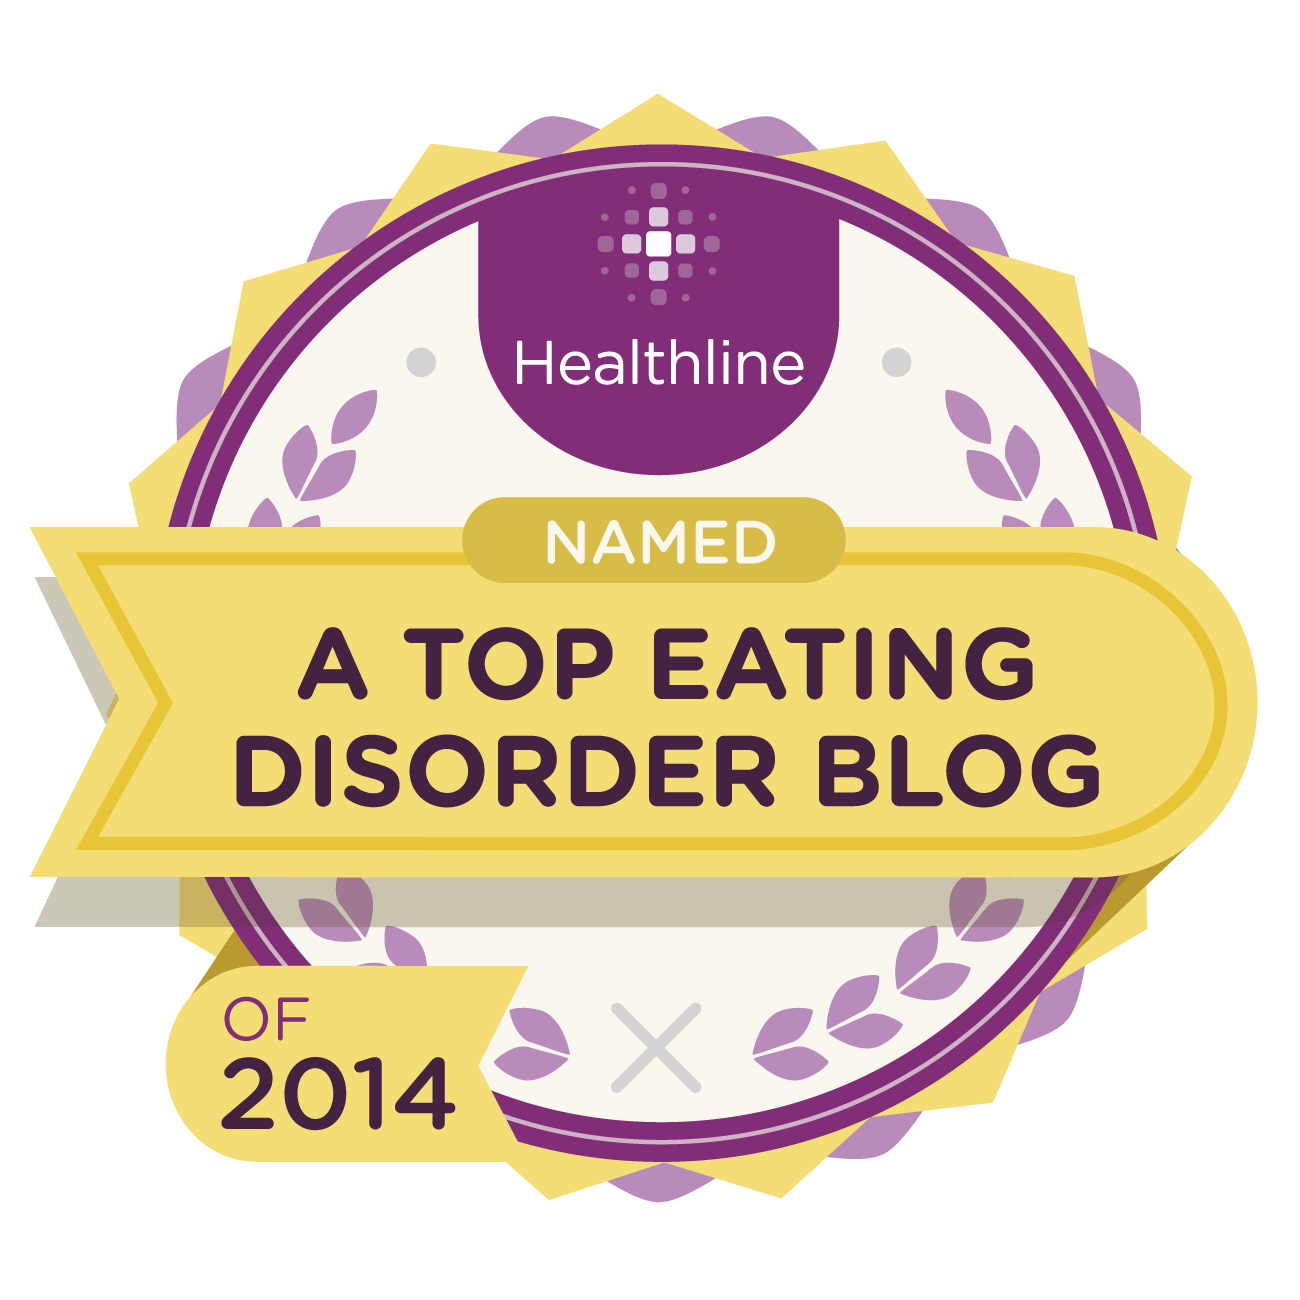 The Best Eating Disorder Health Blogs of 2014